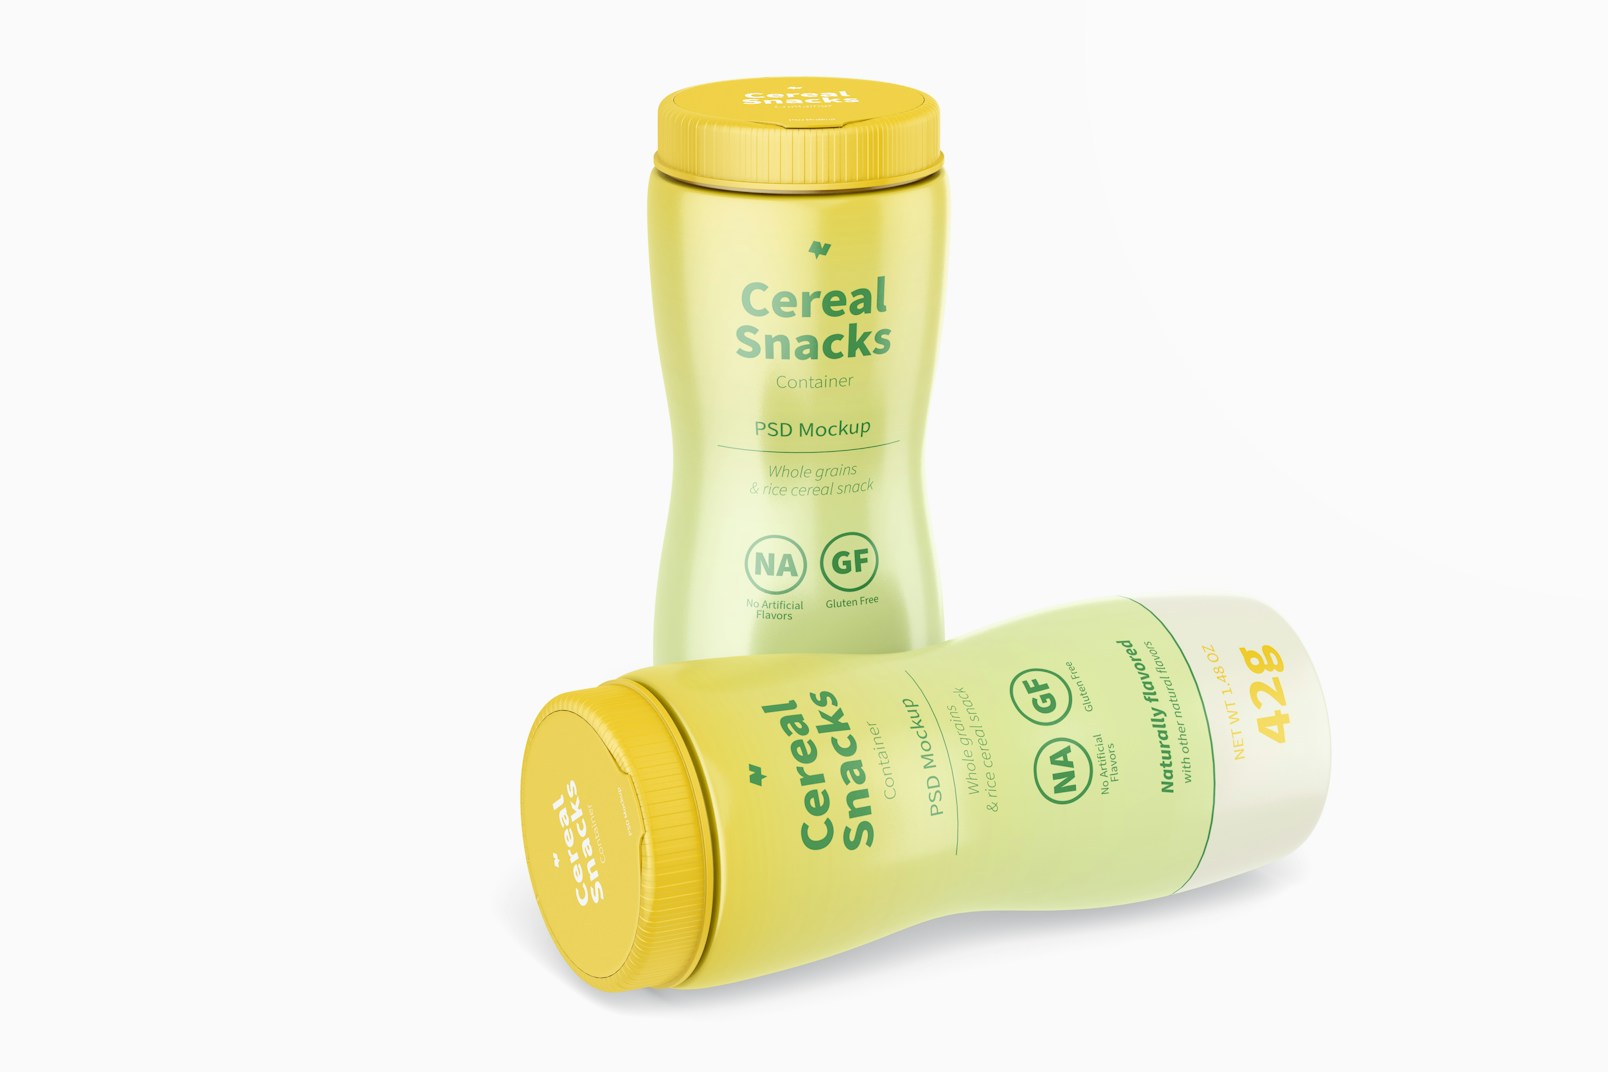 Cereal Snacks Bottles Mockup, Standing and Dropped